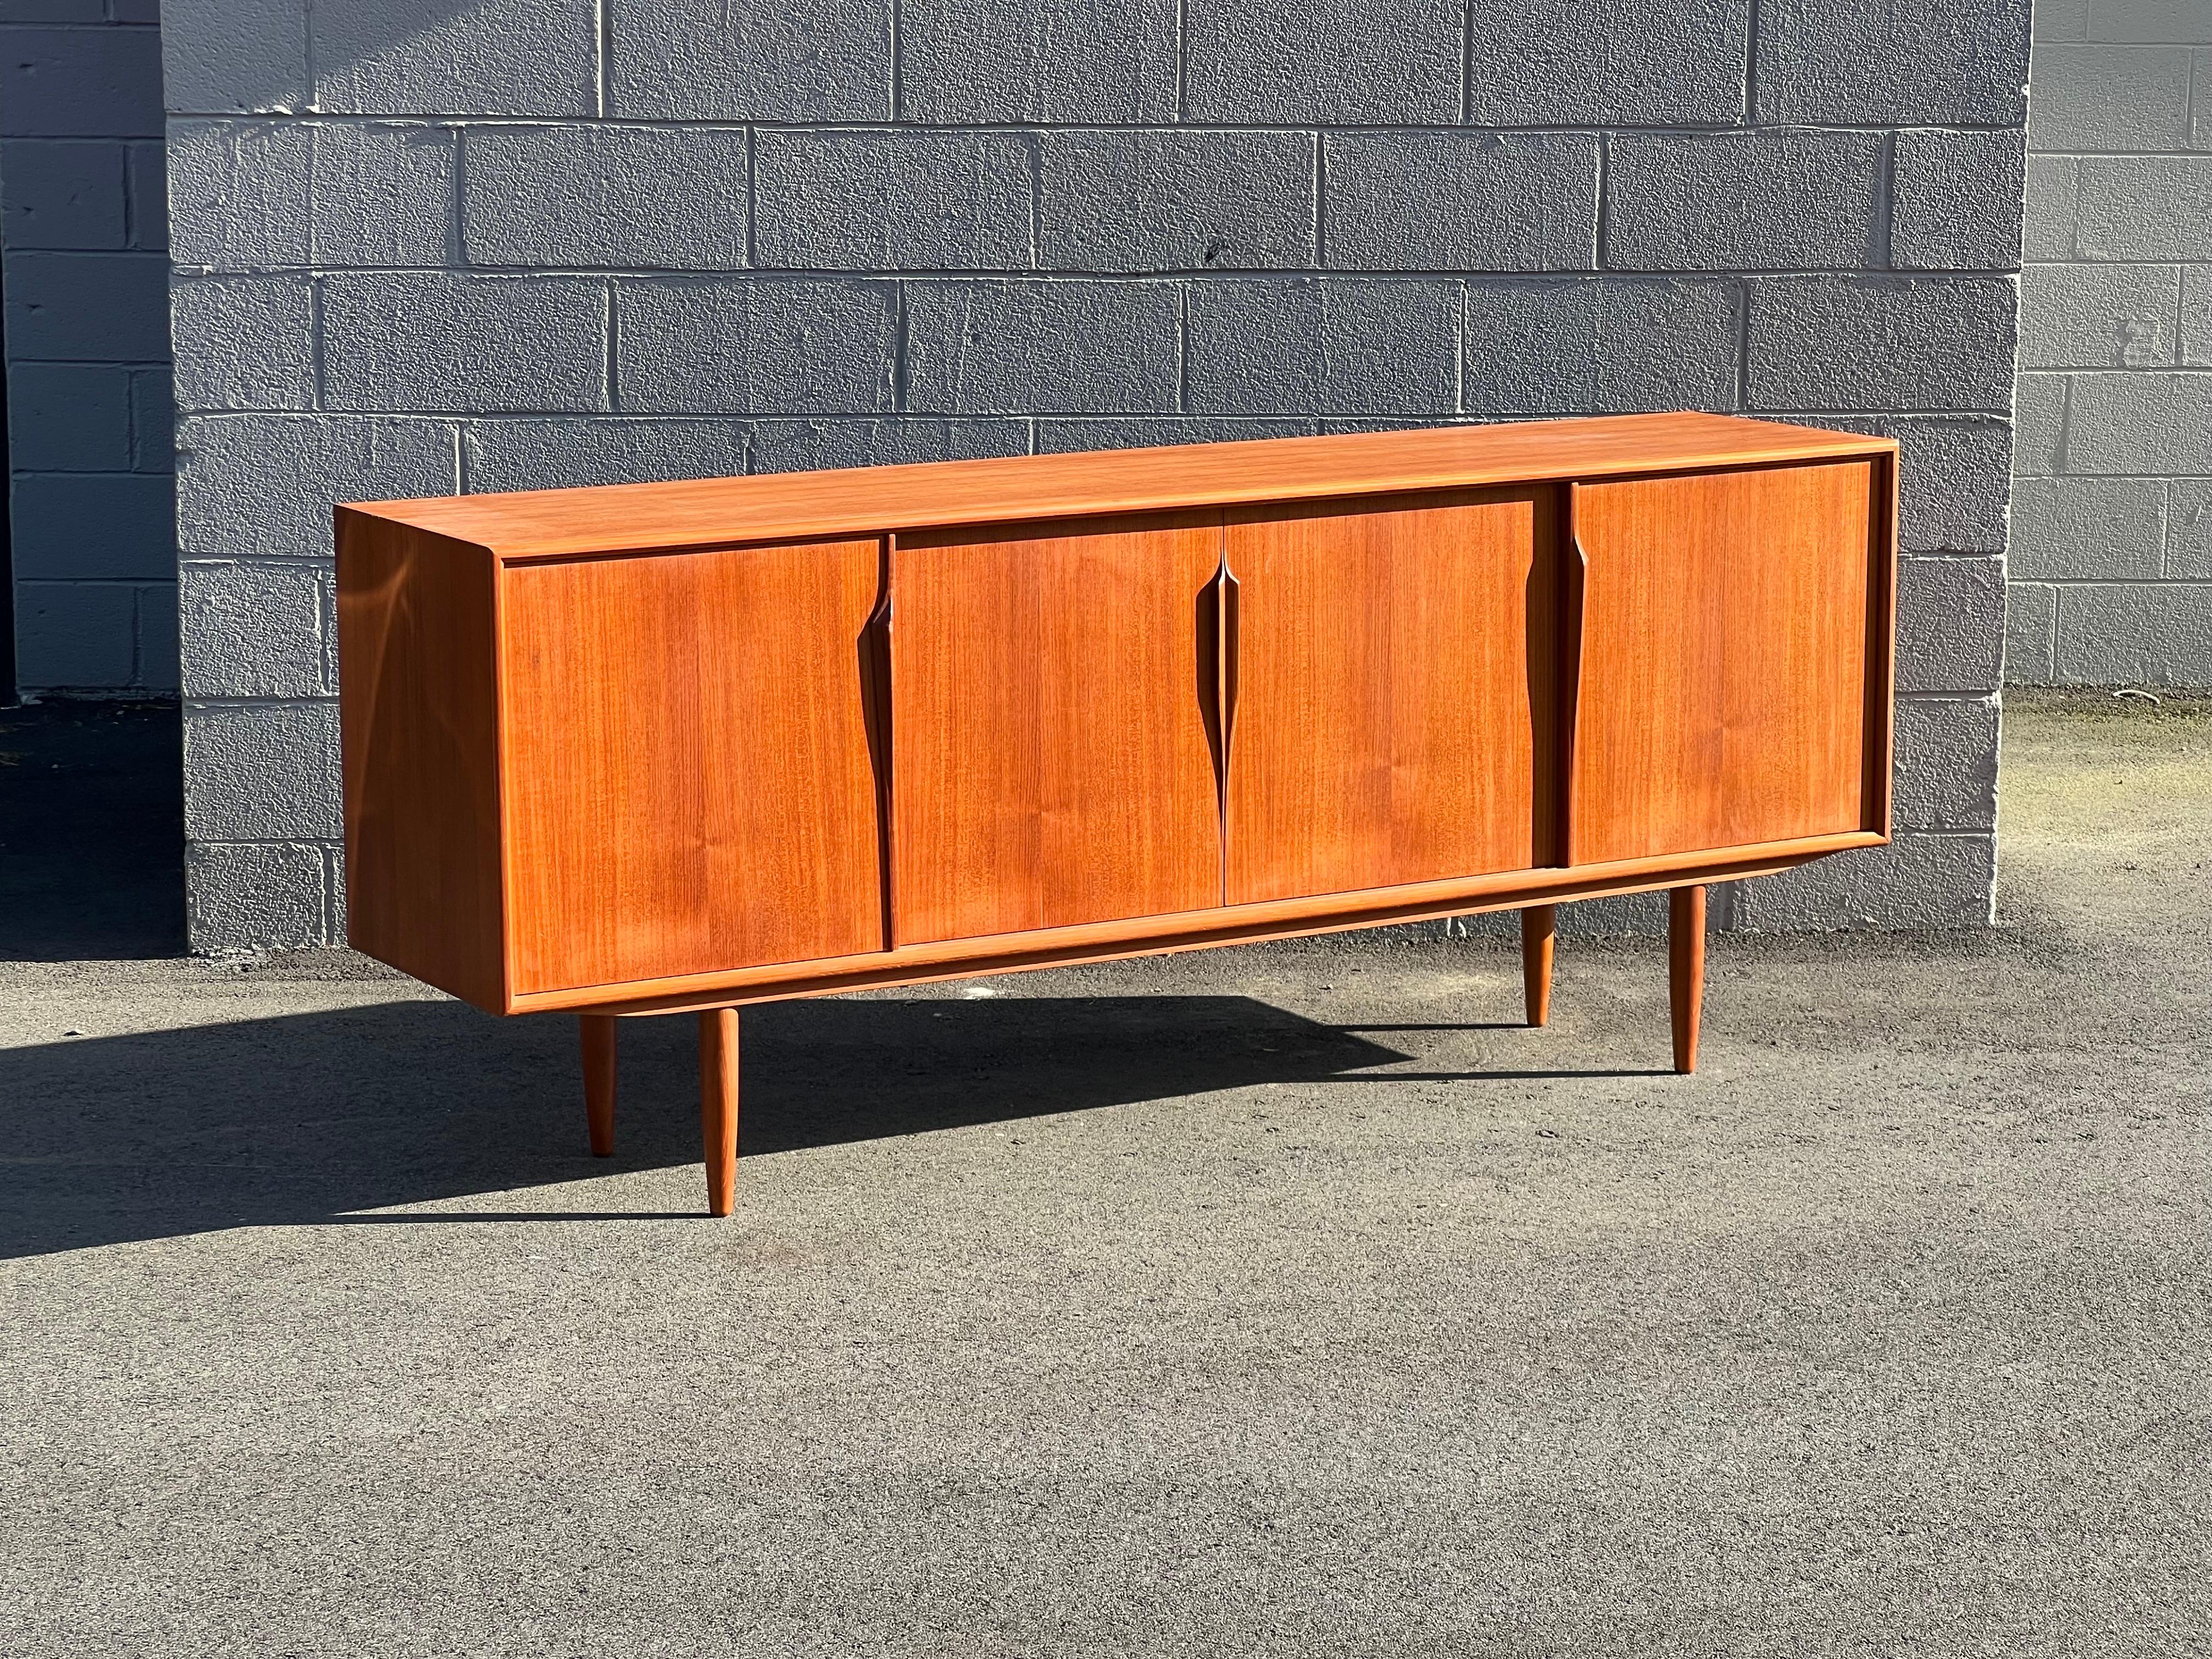 Danish teak credenza designed by Axel Christensen for ACO Møbler circa 1960s. This sideboard features four sliding doors with beautifully sculpted teak handles. Each compartment behind the doors opens to adjustable shelving and a total of four